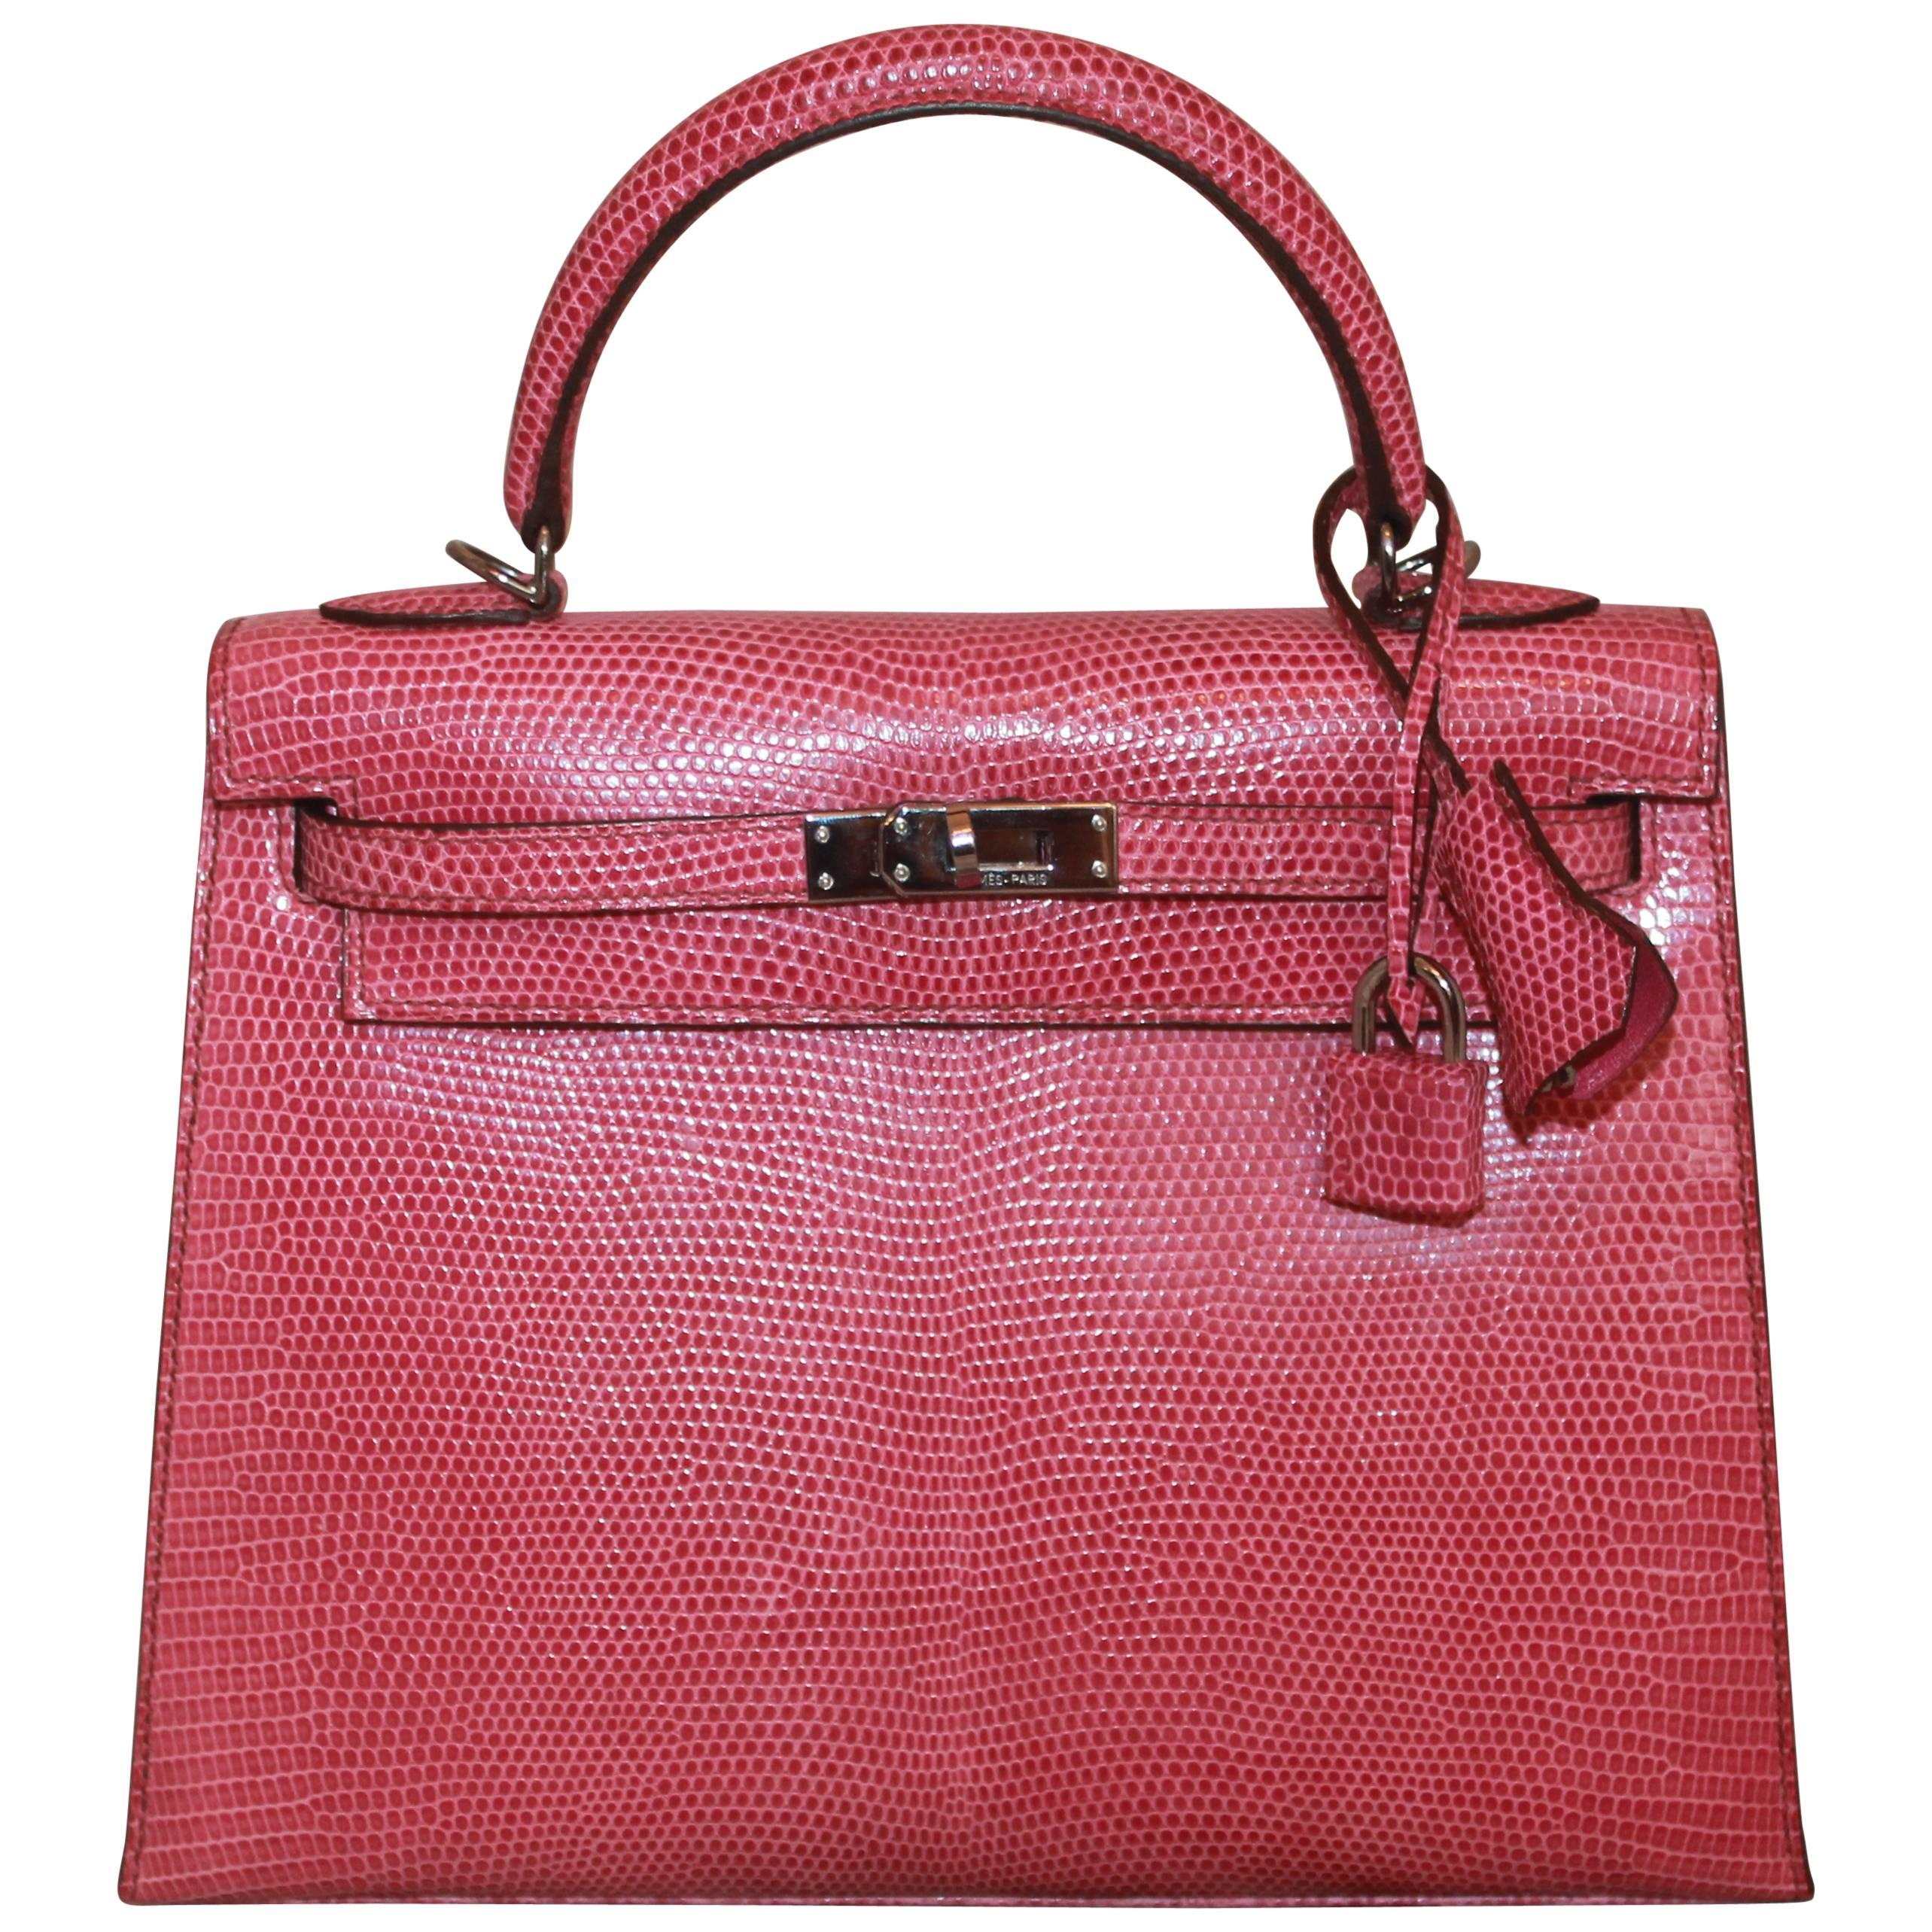 Hermes Pink Lizard Kelly with All Components - 25cm - SHW